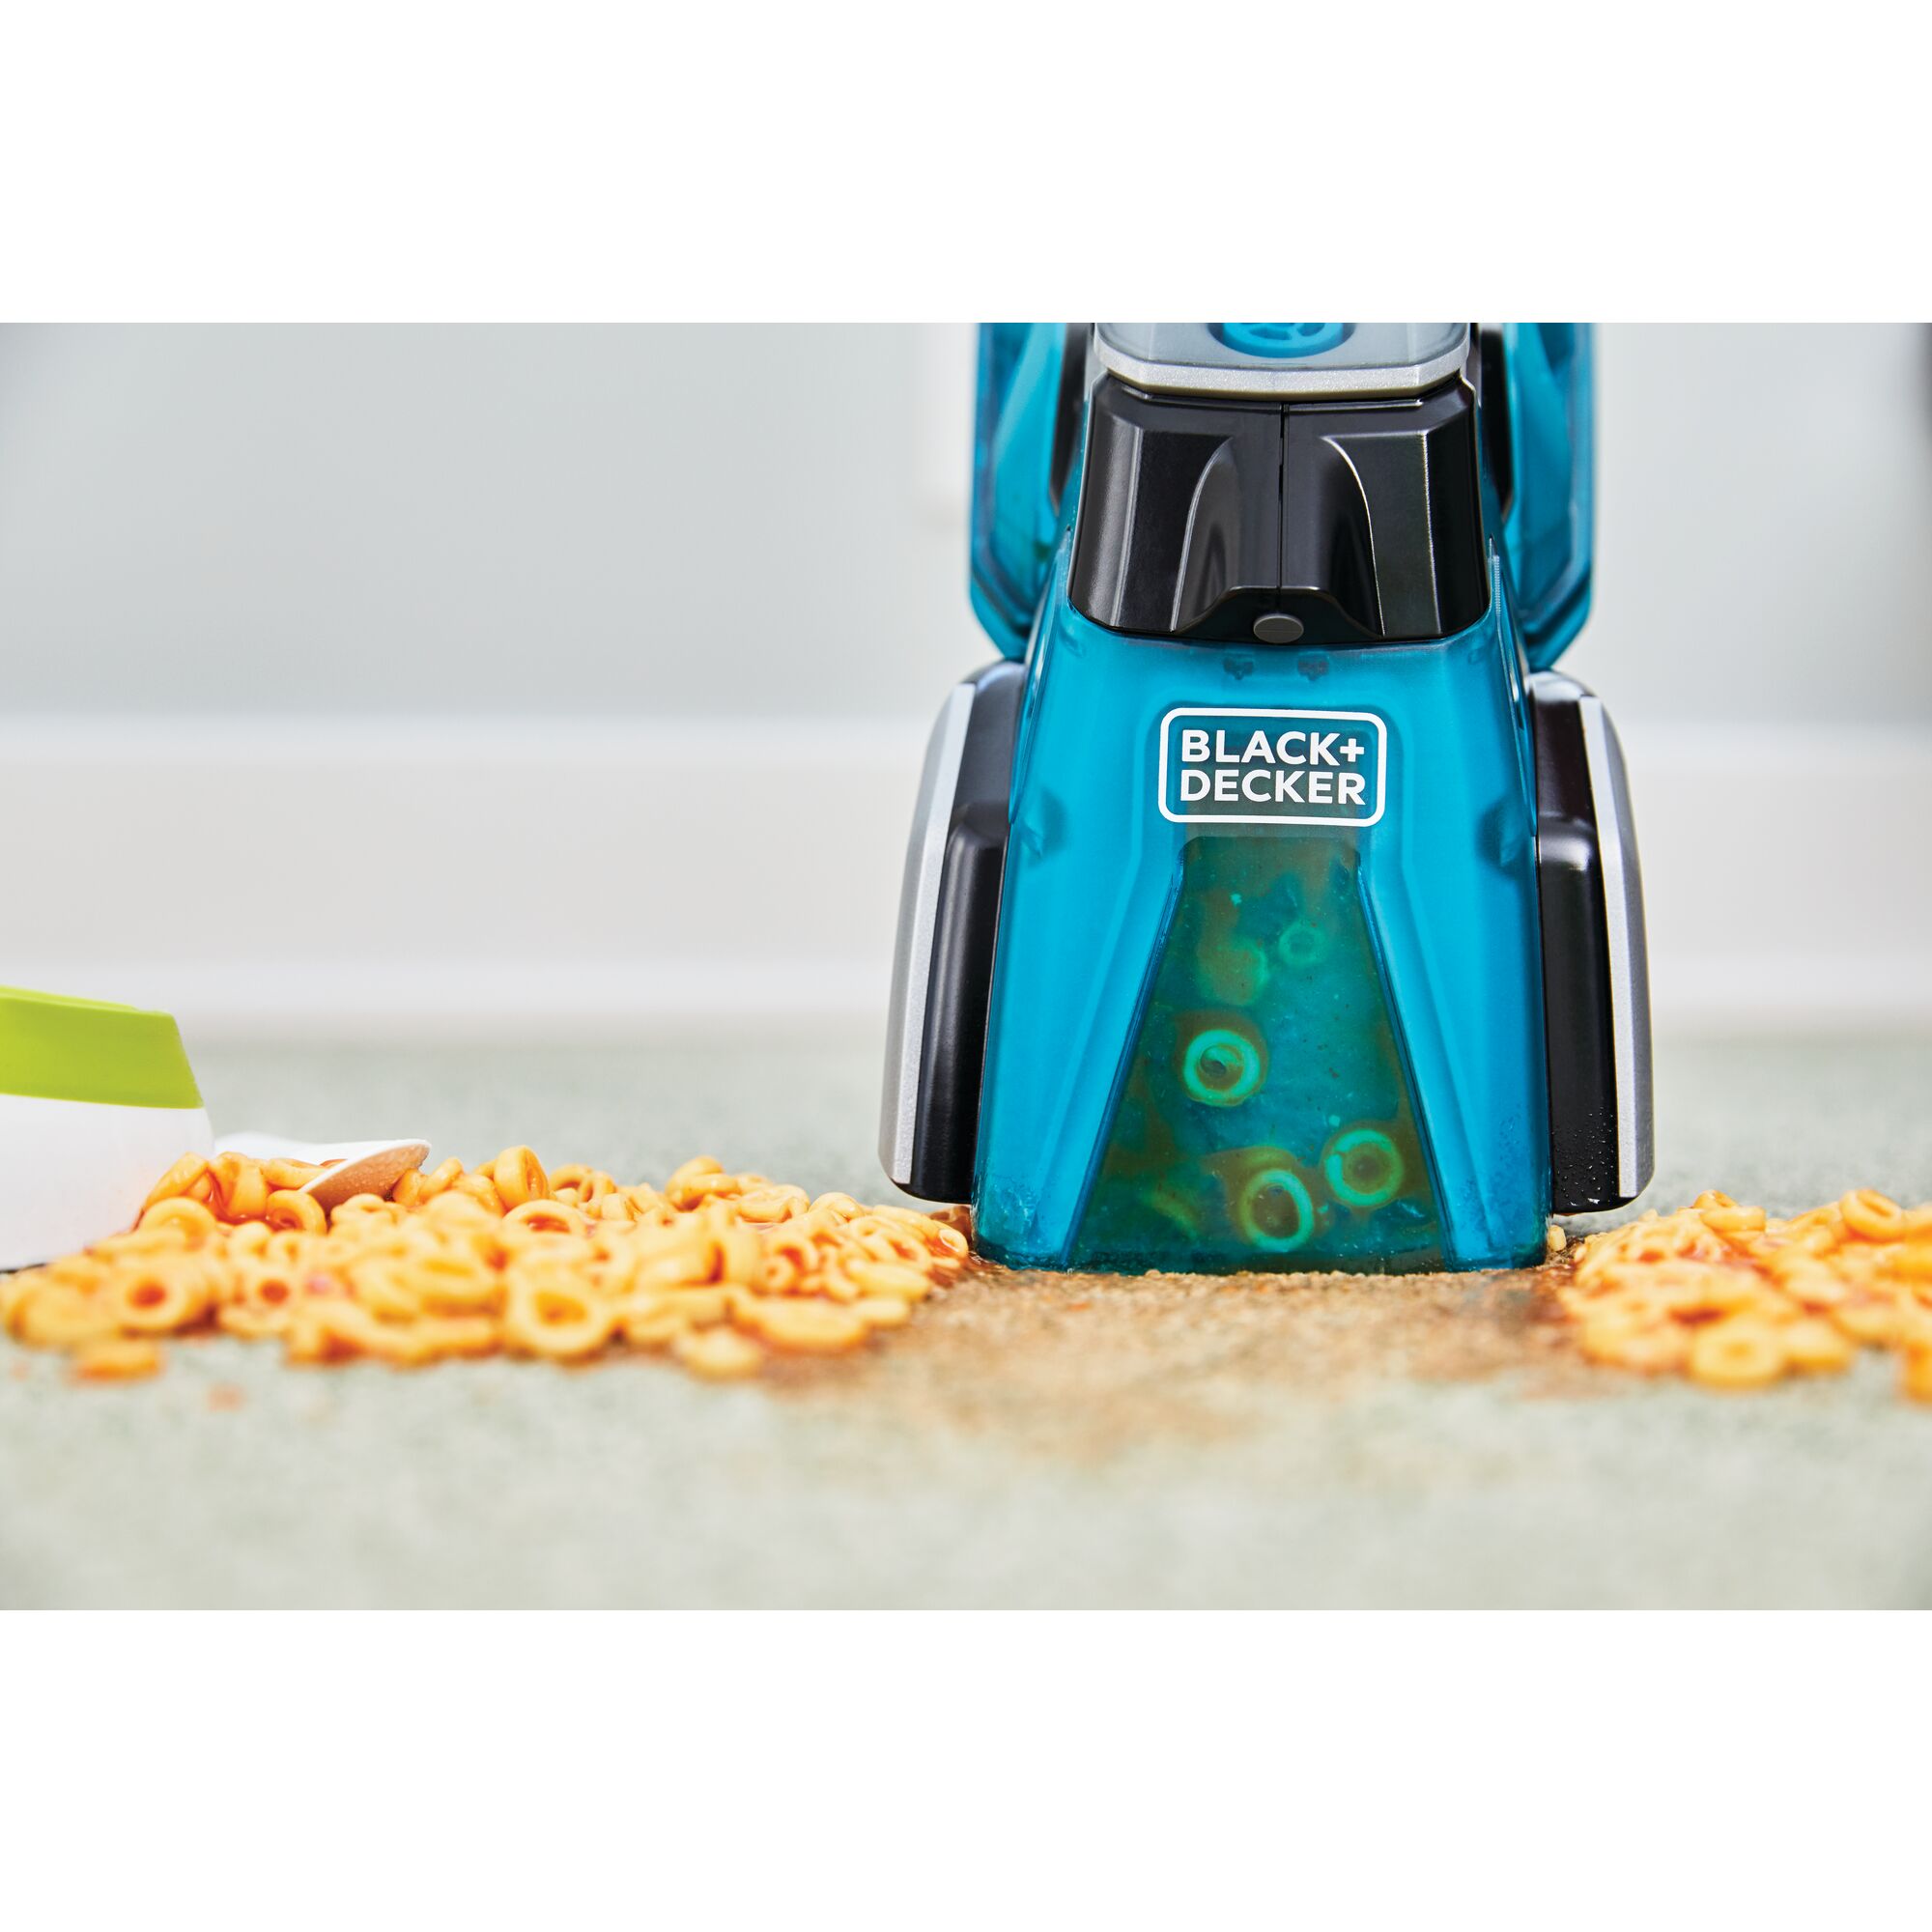 Black and decker Spillbuster Cordless Spill And Spot Portable Carpet Cleaner being used by a person to clean up spaghettios from a light colored floor